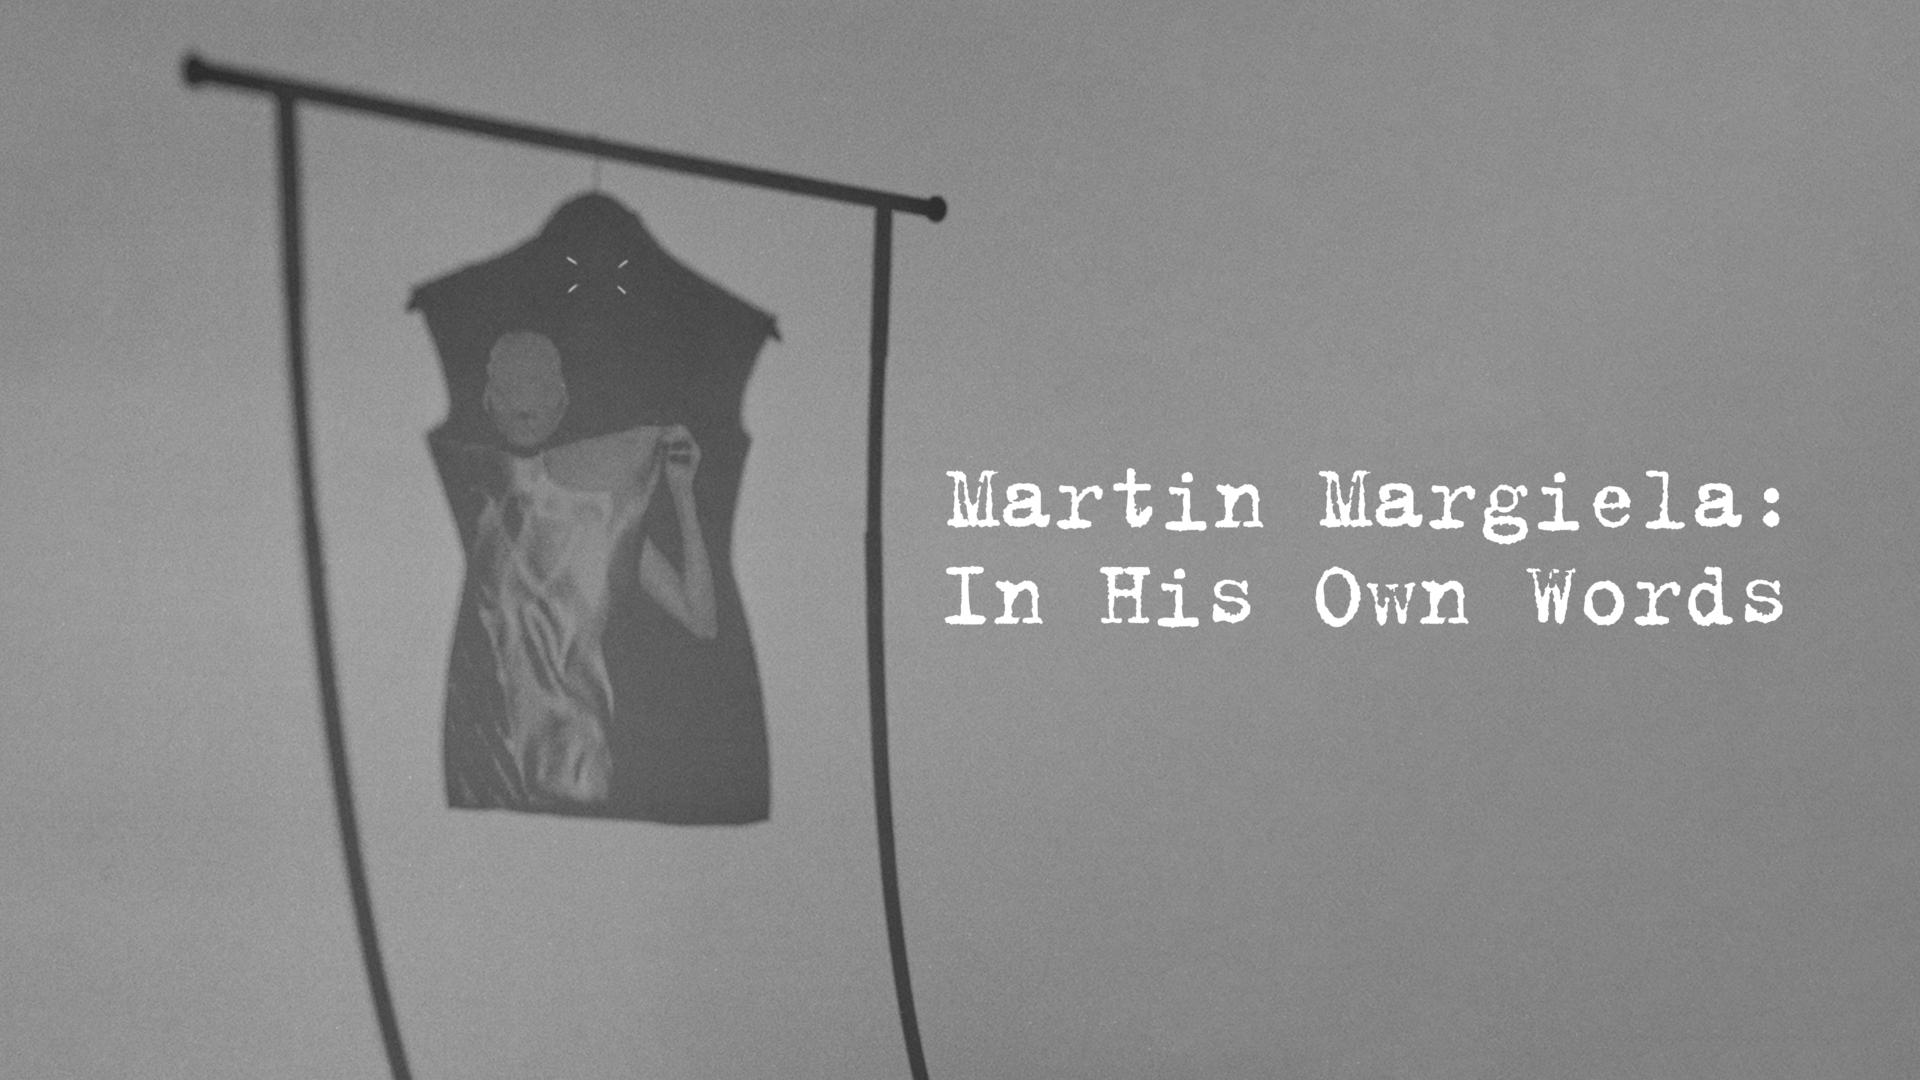 MARTIN MARGIELA: IN HIS OWN WORDS